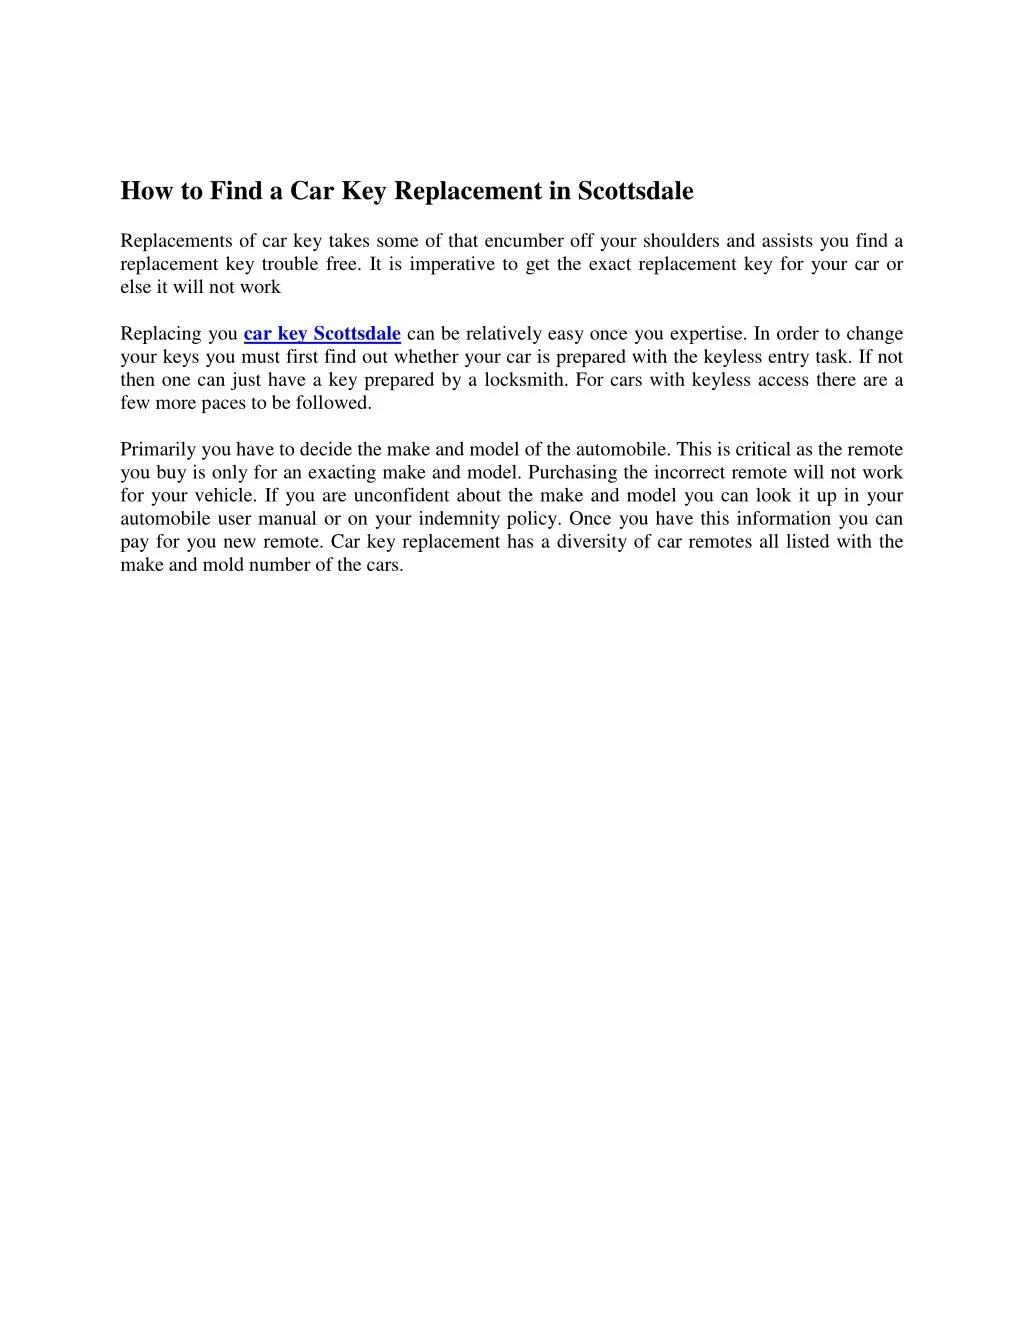 how to find a car key replacement in scottsdale n.